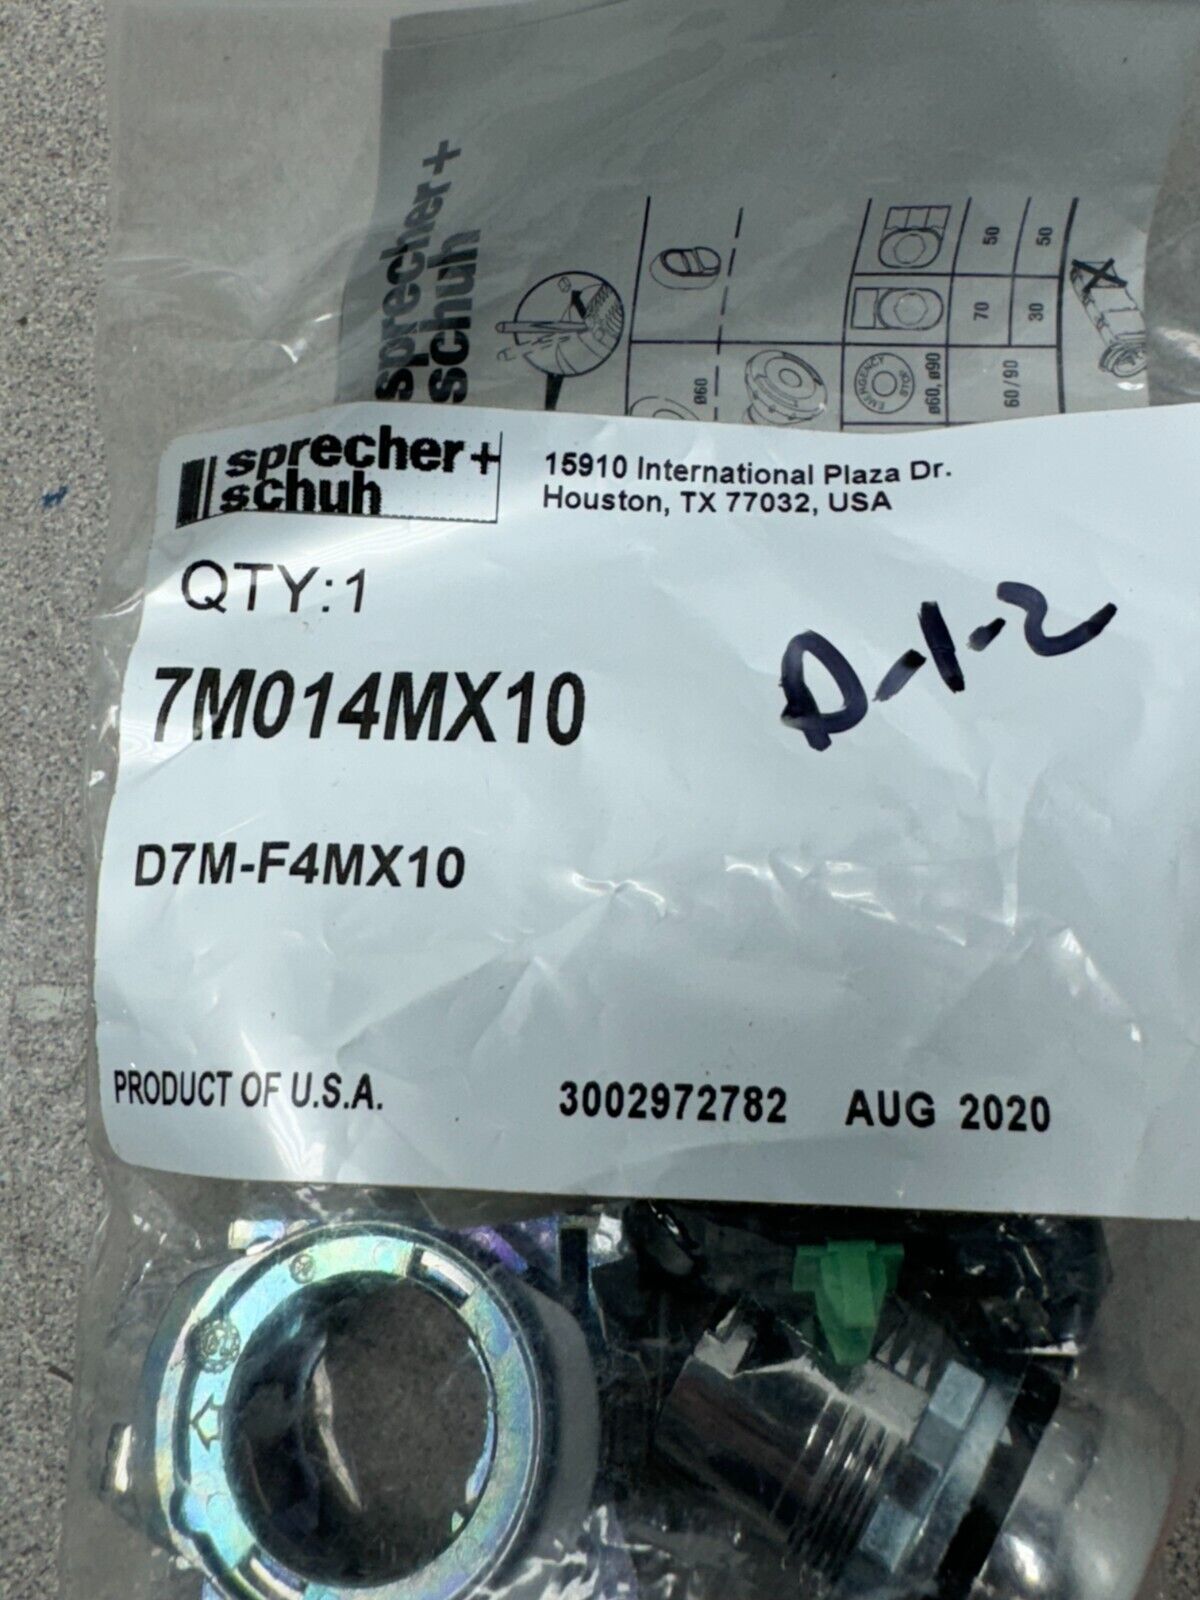 NEW IN PACKAGE SPRECHER SCHUH PUSH BUTTON SWITCH D7M-F4MX10